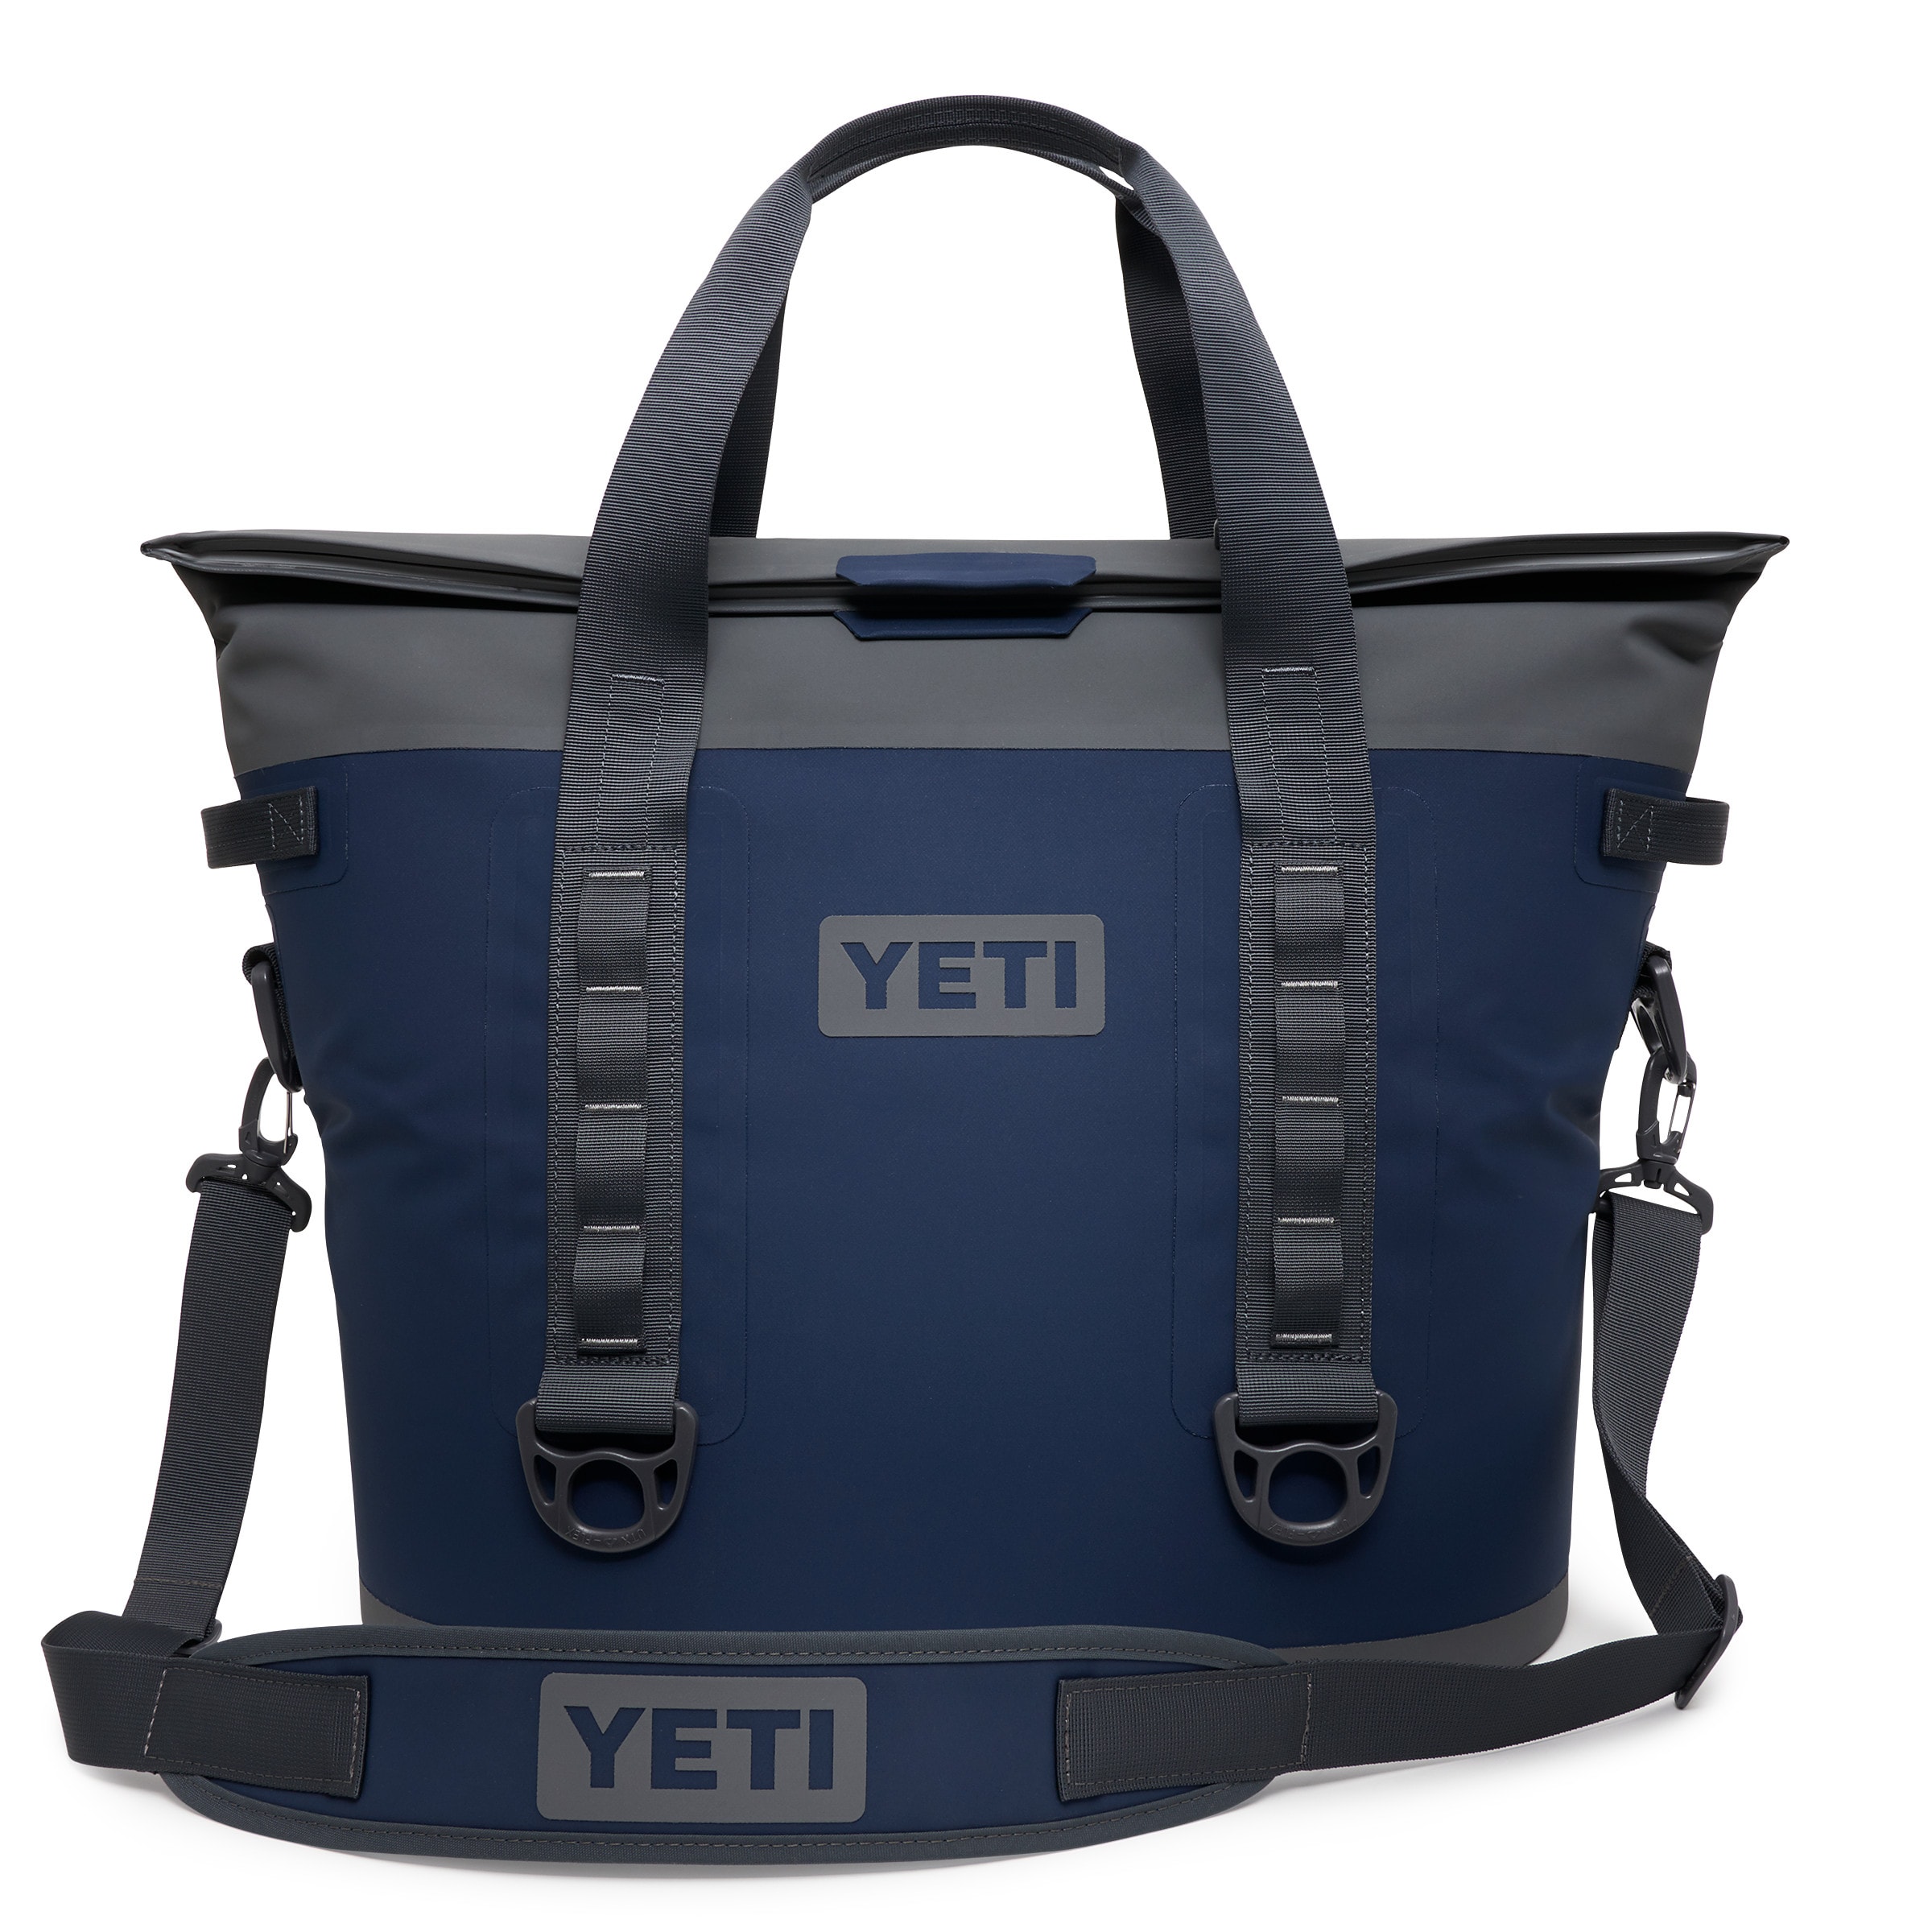 YETI Hopper M30 Insulated Bag Cooler, Navy at Lowes.com